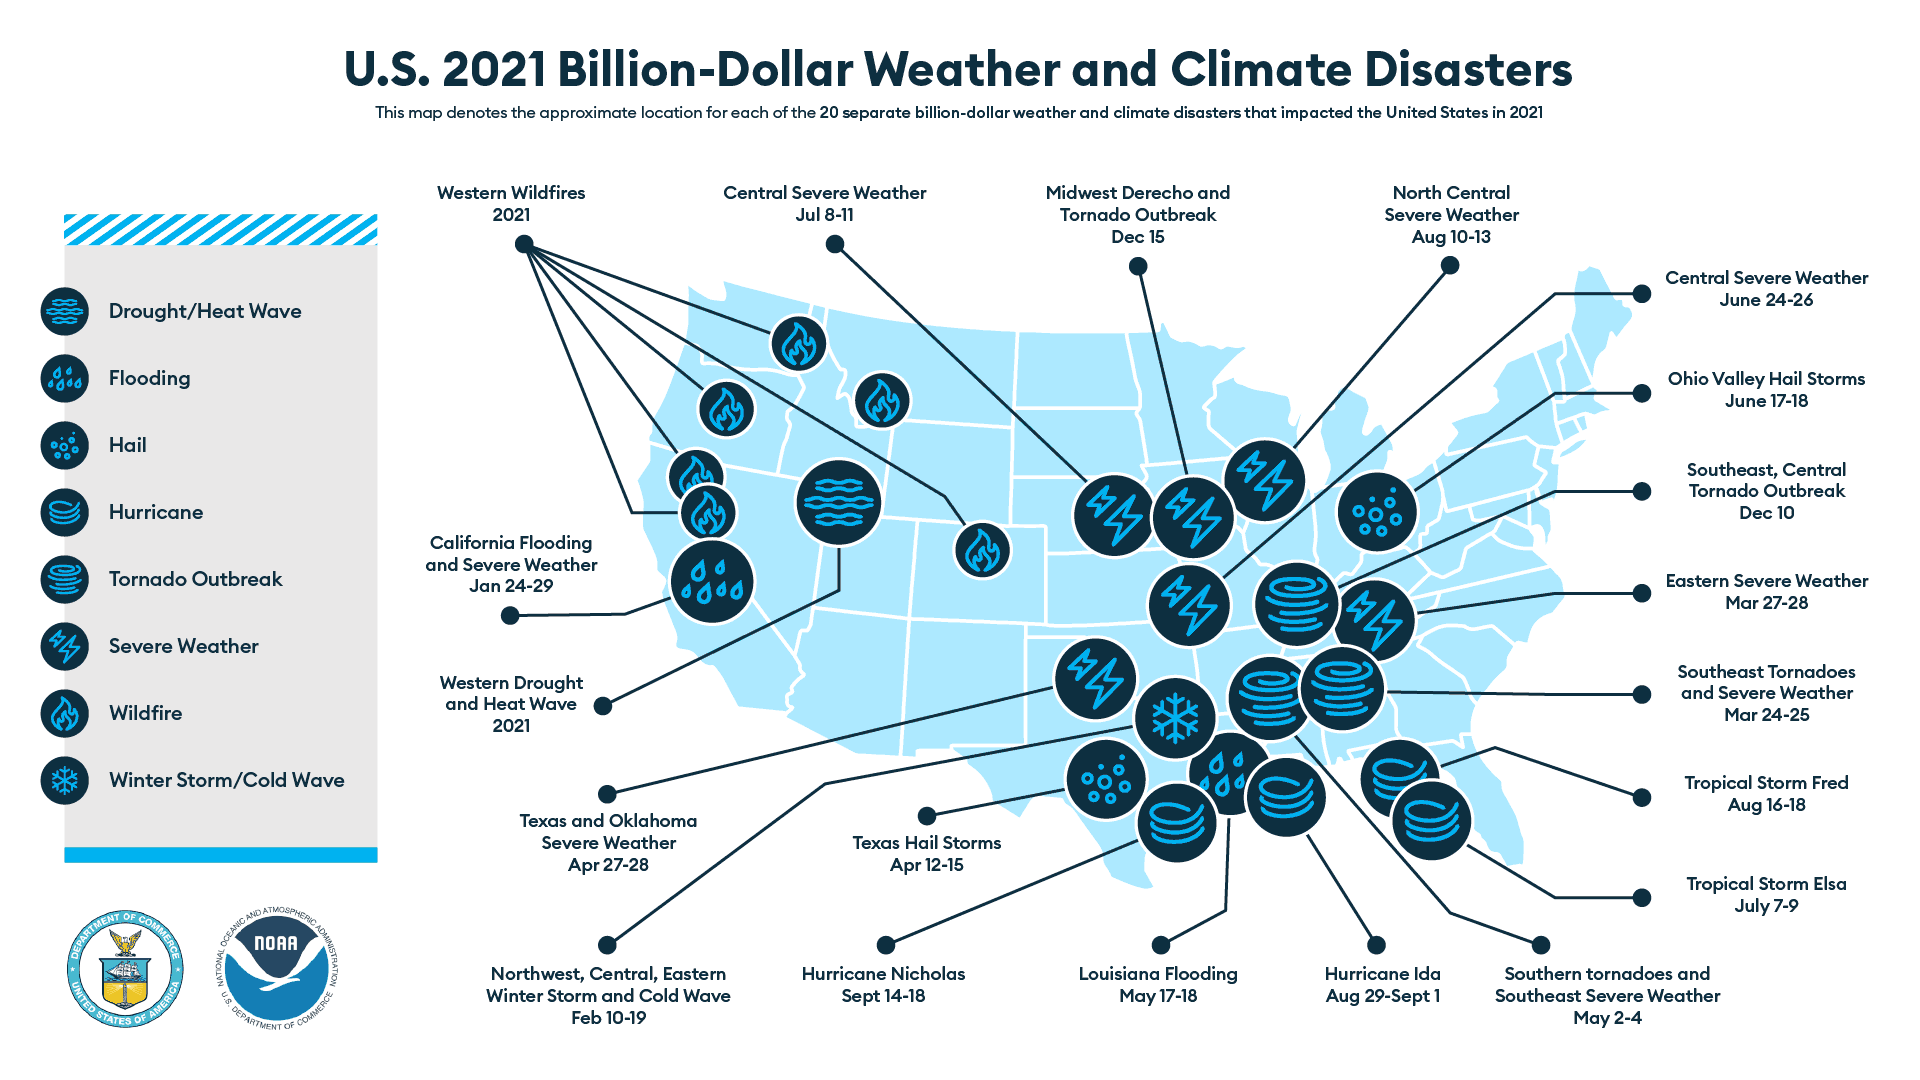 U.S. 2021 Billion-Dollar Weather and Climate Disasters infographic